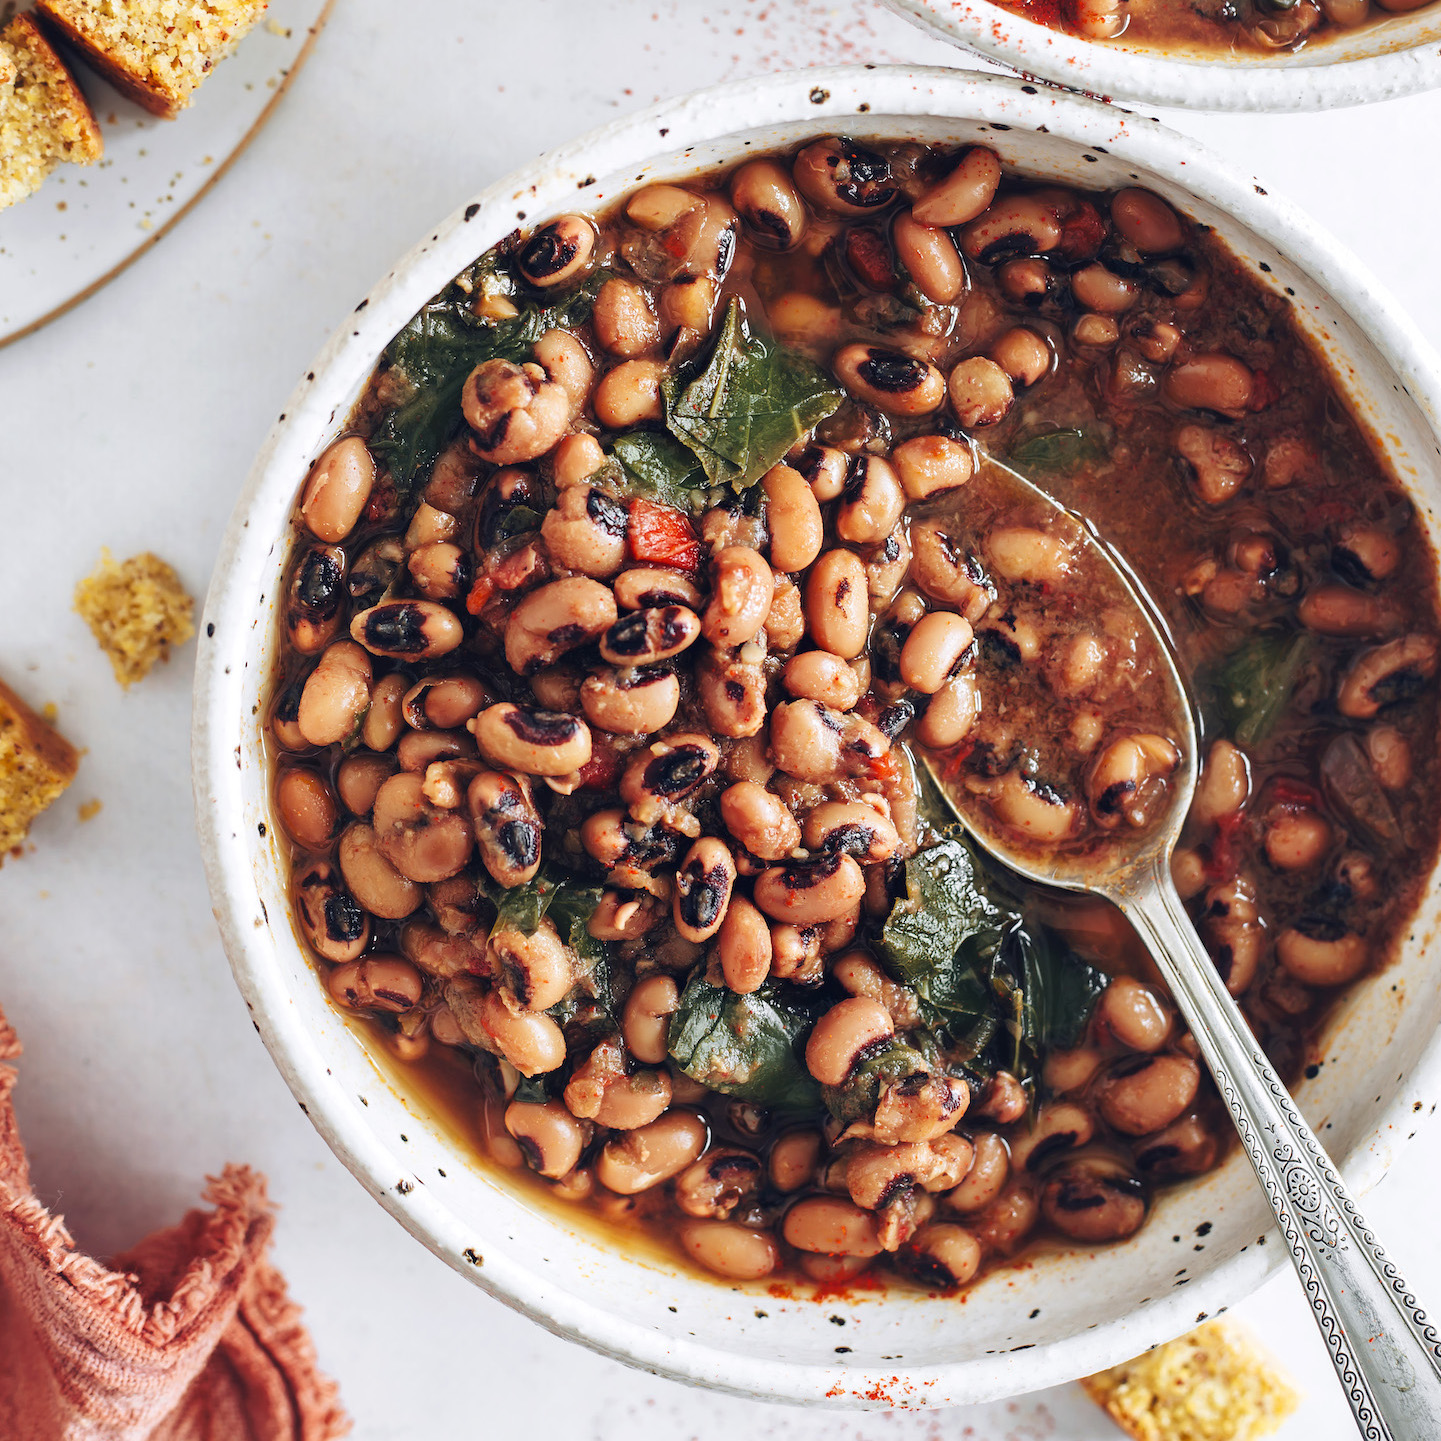 https://minimalistbaker.com/wp-content/uploads/2020/11/Instant-Pot-Black-Eyed-Peas-and-Greens-SQUARE.jpg